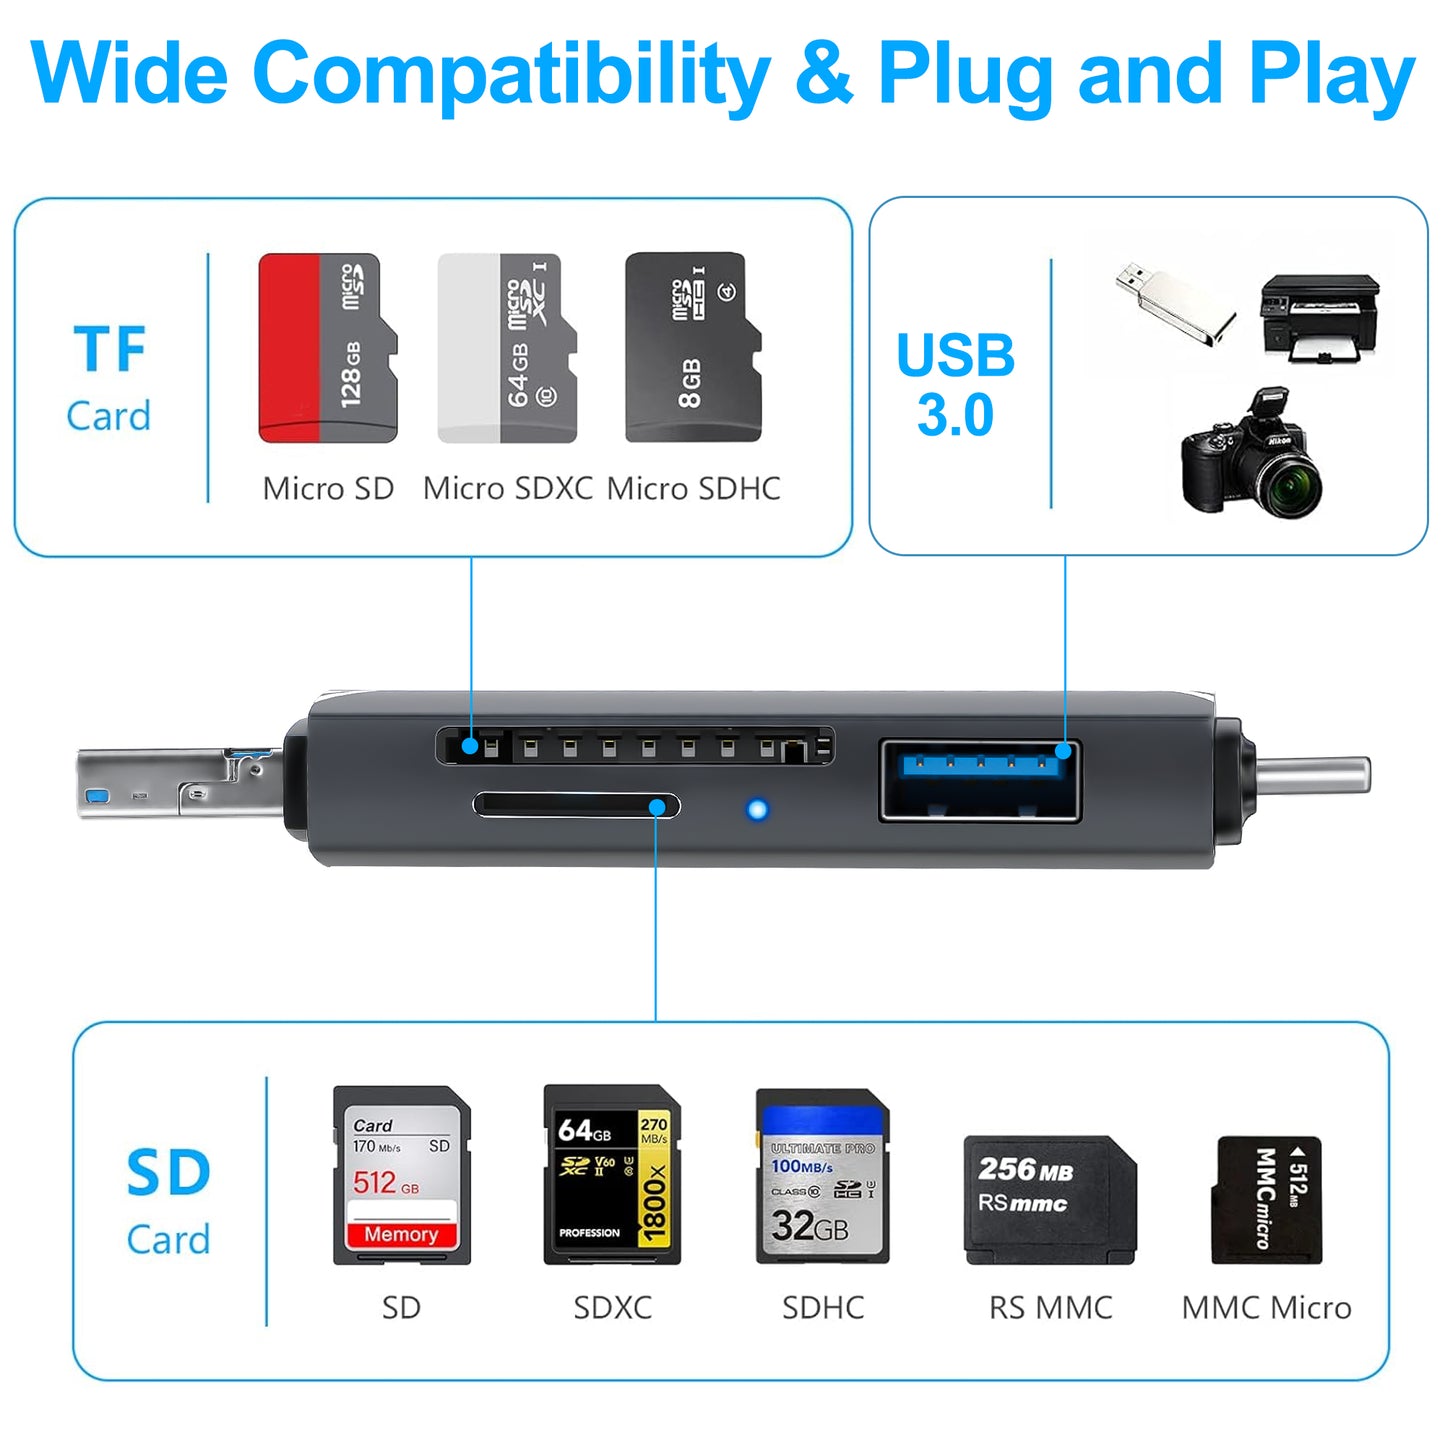 6 in 1 OTG Connector Memory Card Adapter - Dual Slot USB 3.0/USB C/Micro USB OTG Memory Card TF/SD/Micro SD/SDXC/Micro SDXC/Micro SDHC (Gray)